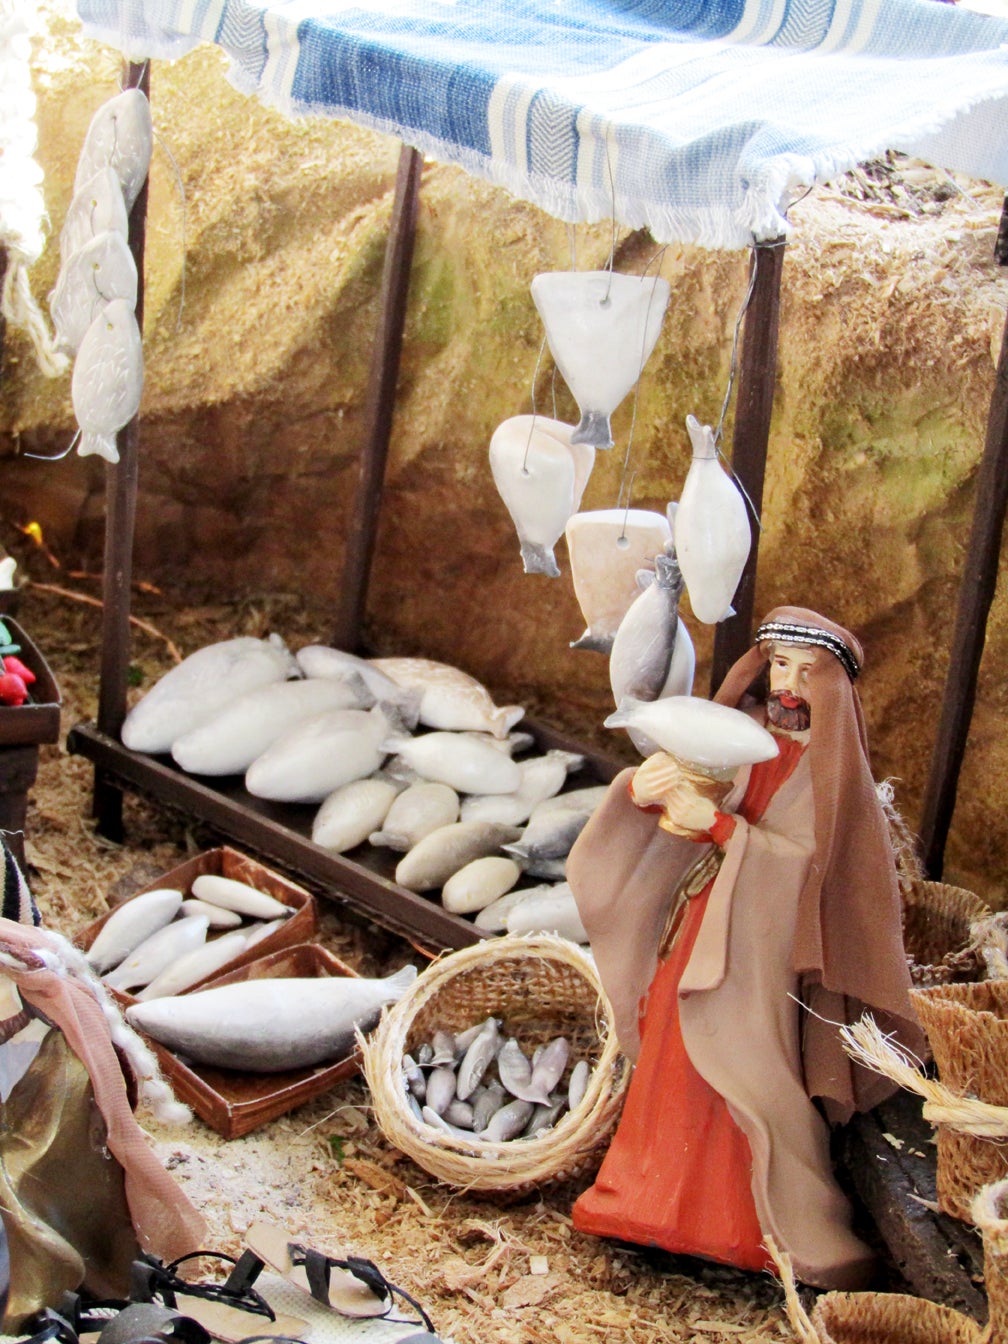 Telling his story: Silvia Viso builds large, authentic nativity